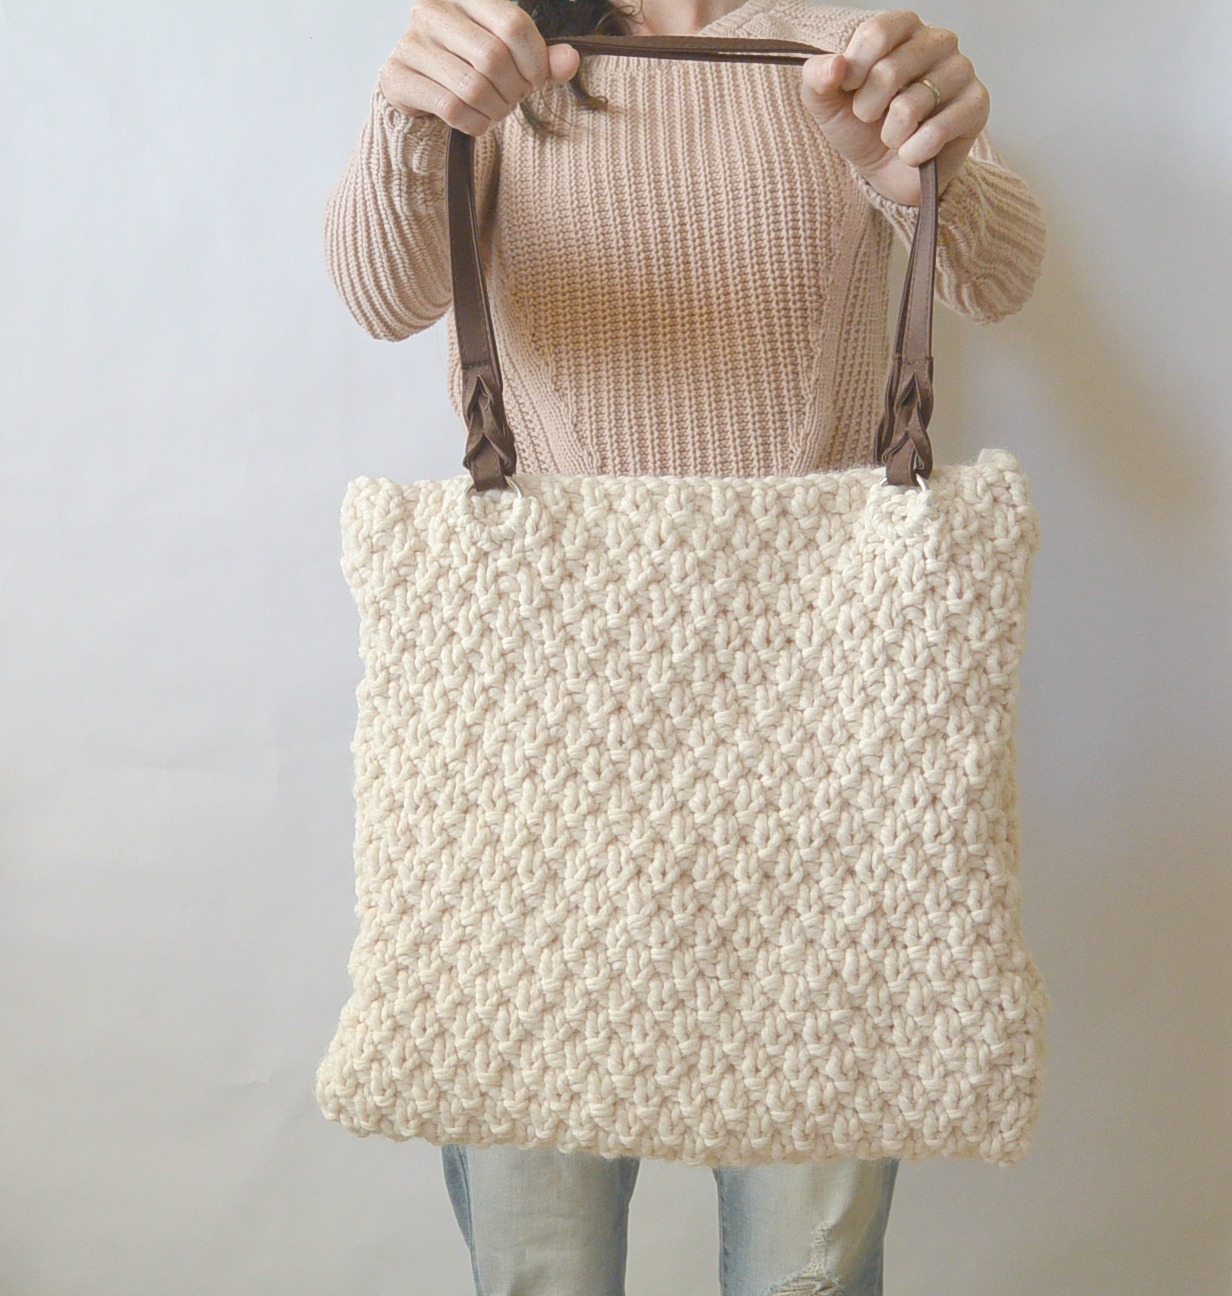 Super-Practical Knitted Yarn Bags - Free Patterns